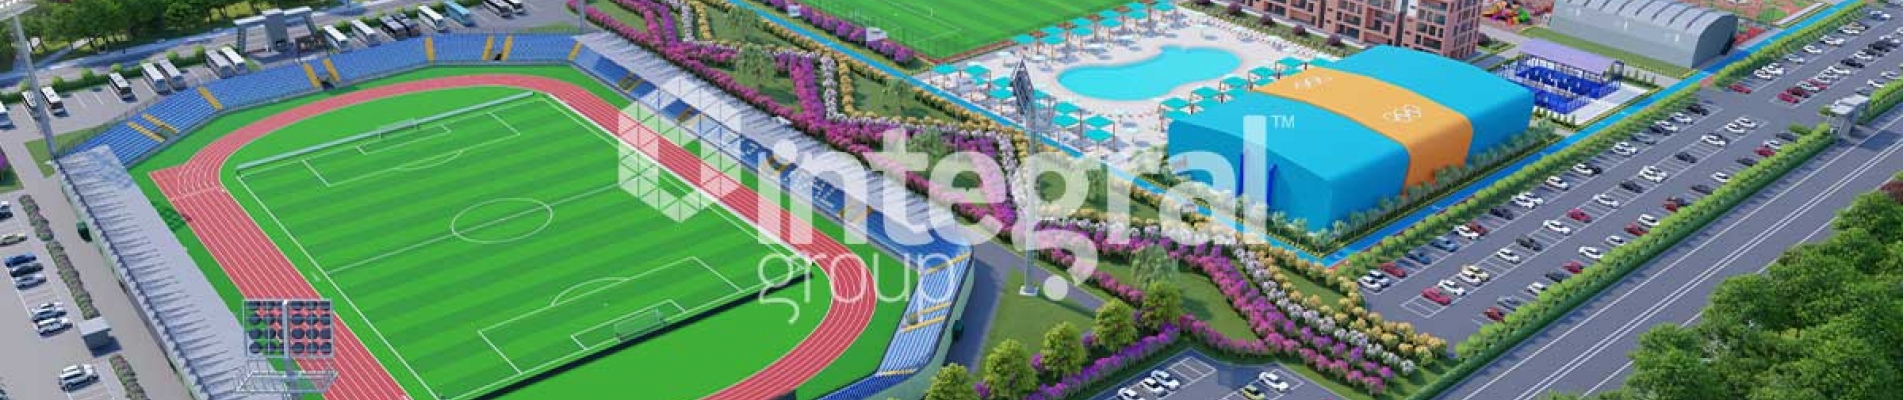 Sports Complex Construction (New Project)